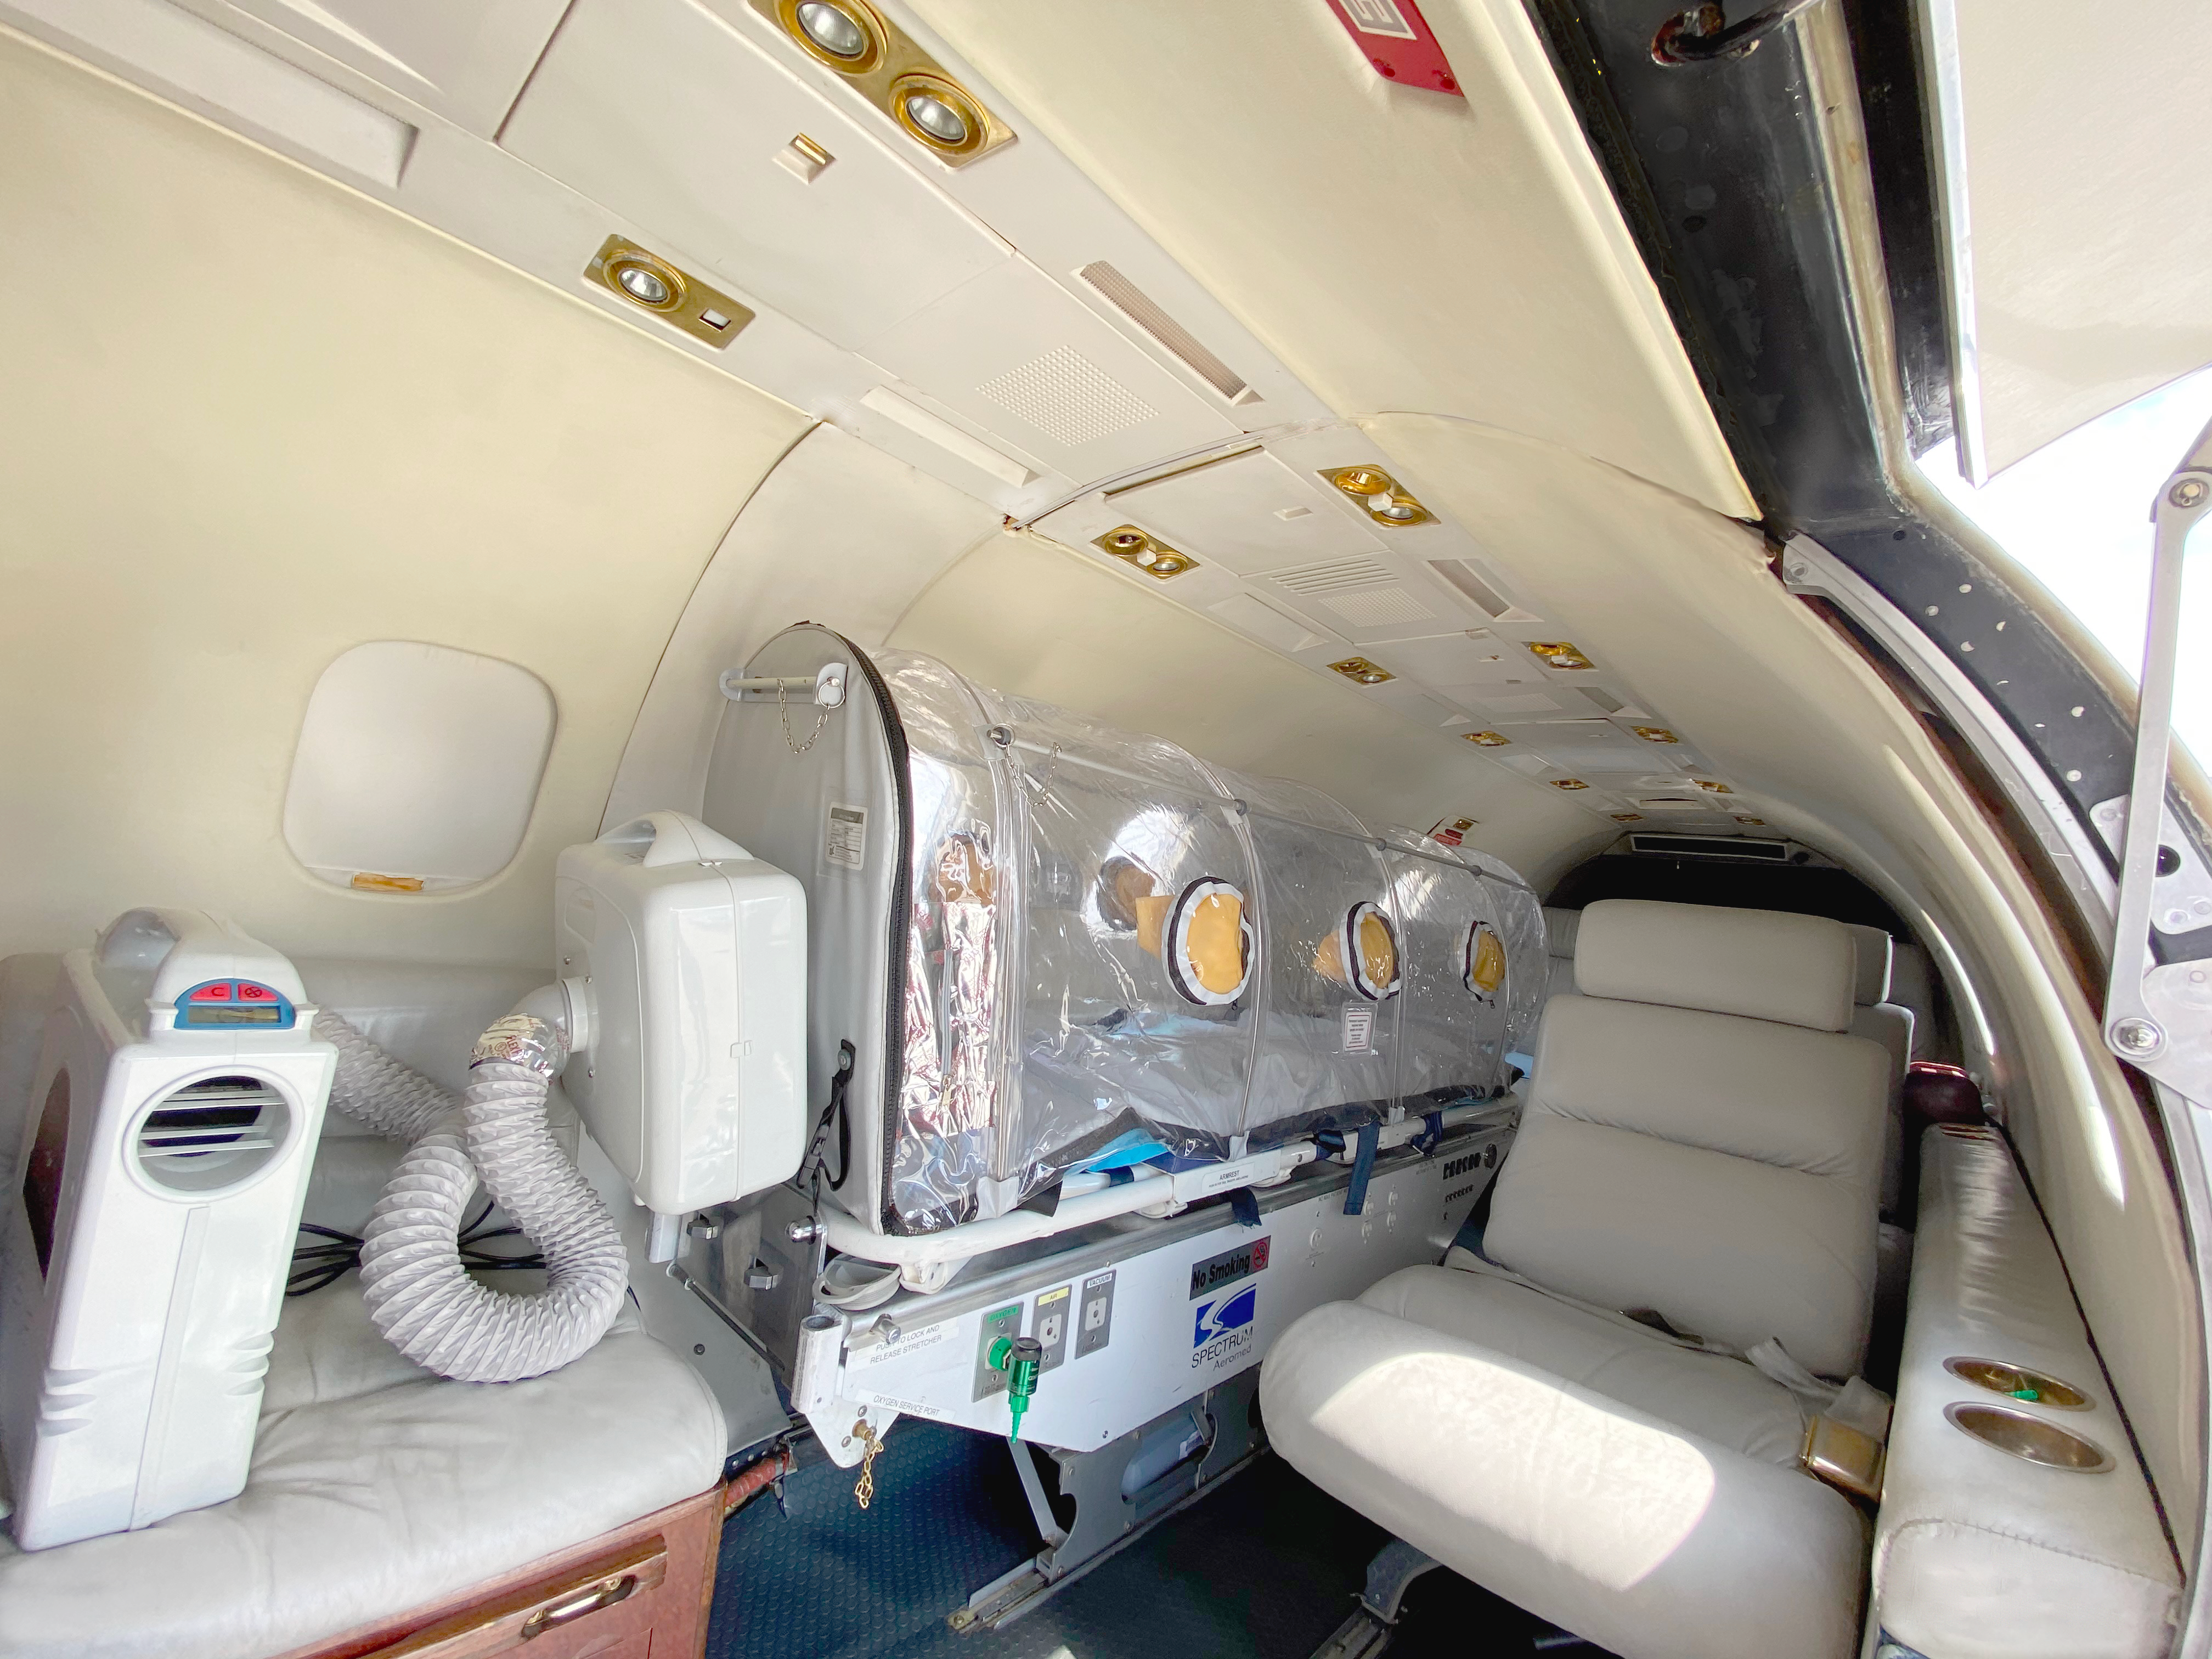 Interior cabin of Aeromedevac Medical plane with oxygen chamber for safe transfer of patient